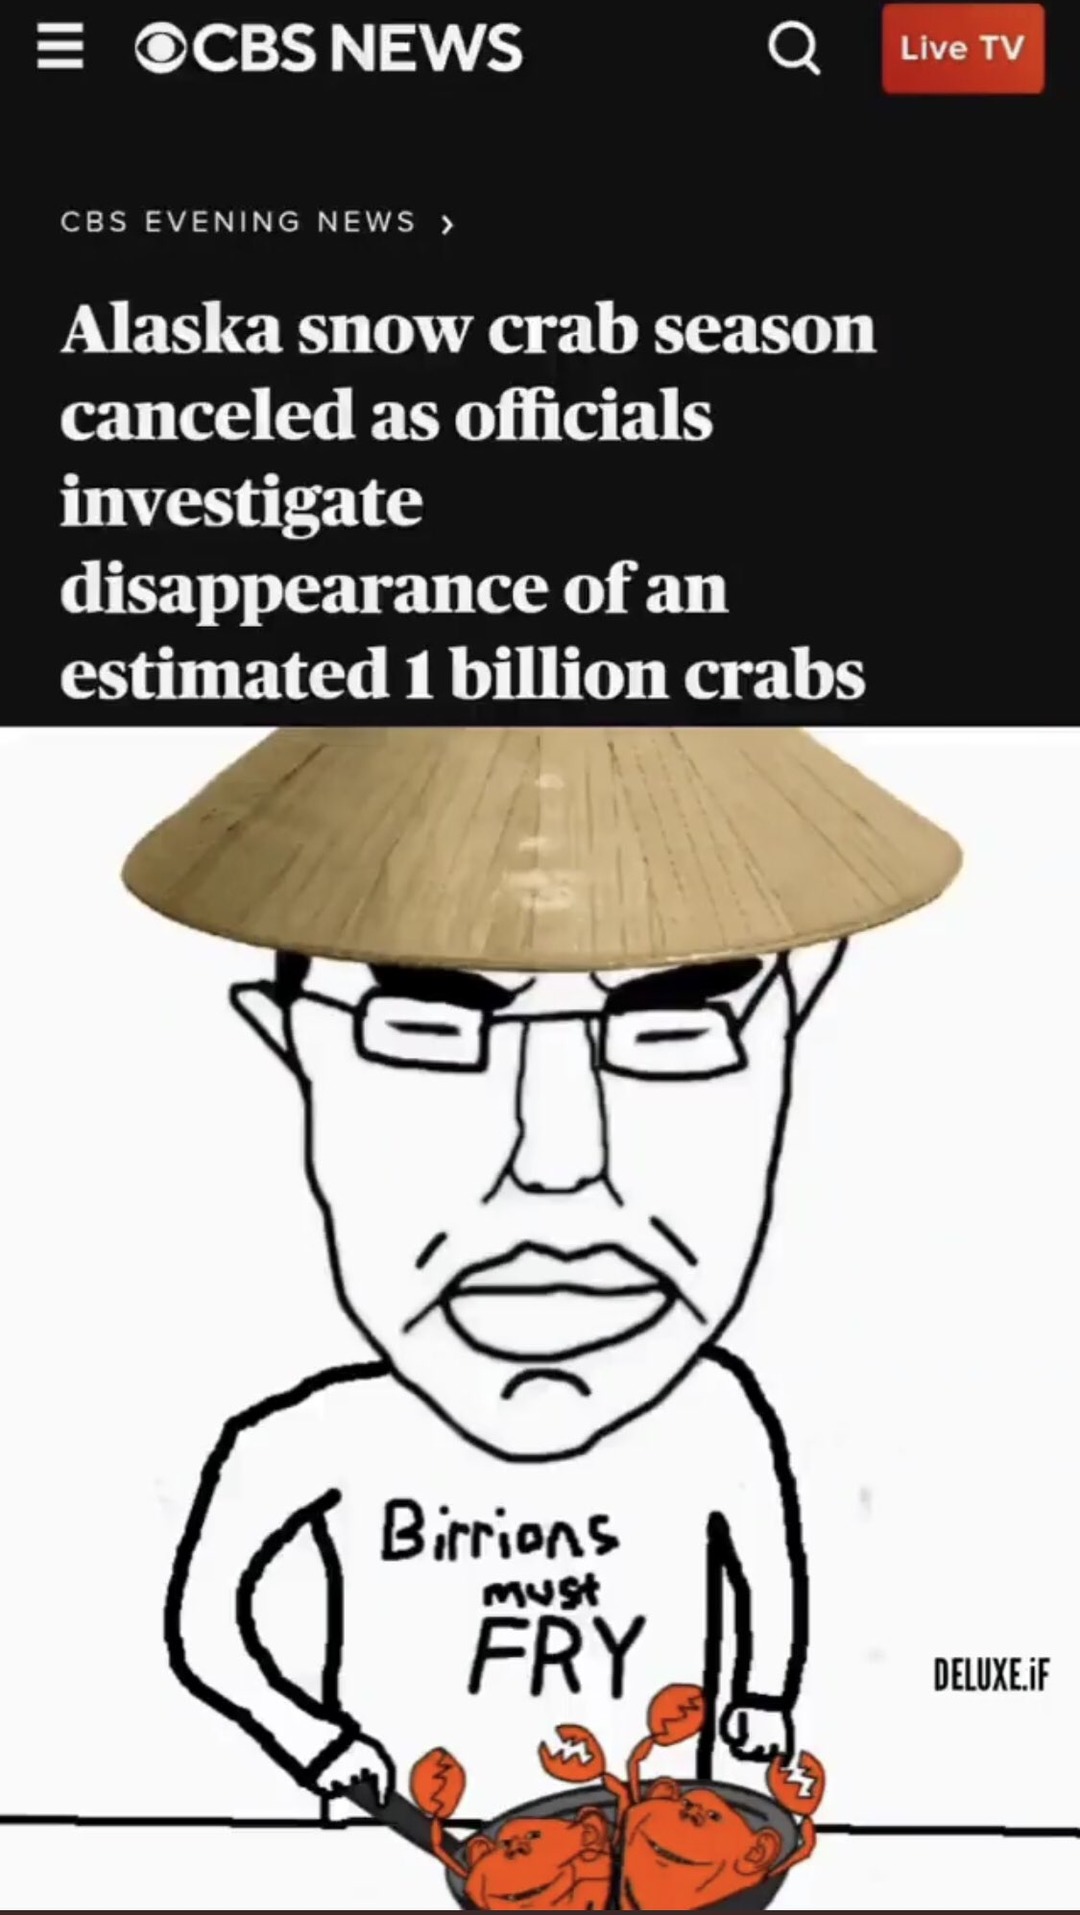 dongs in a crab - meme